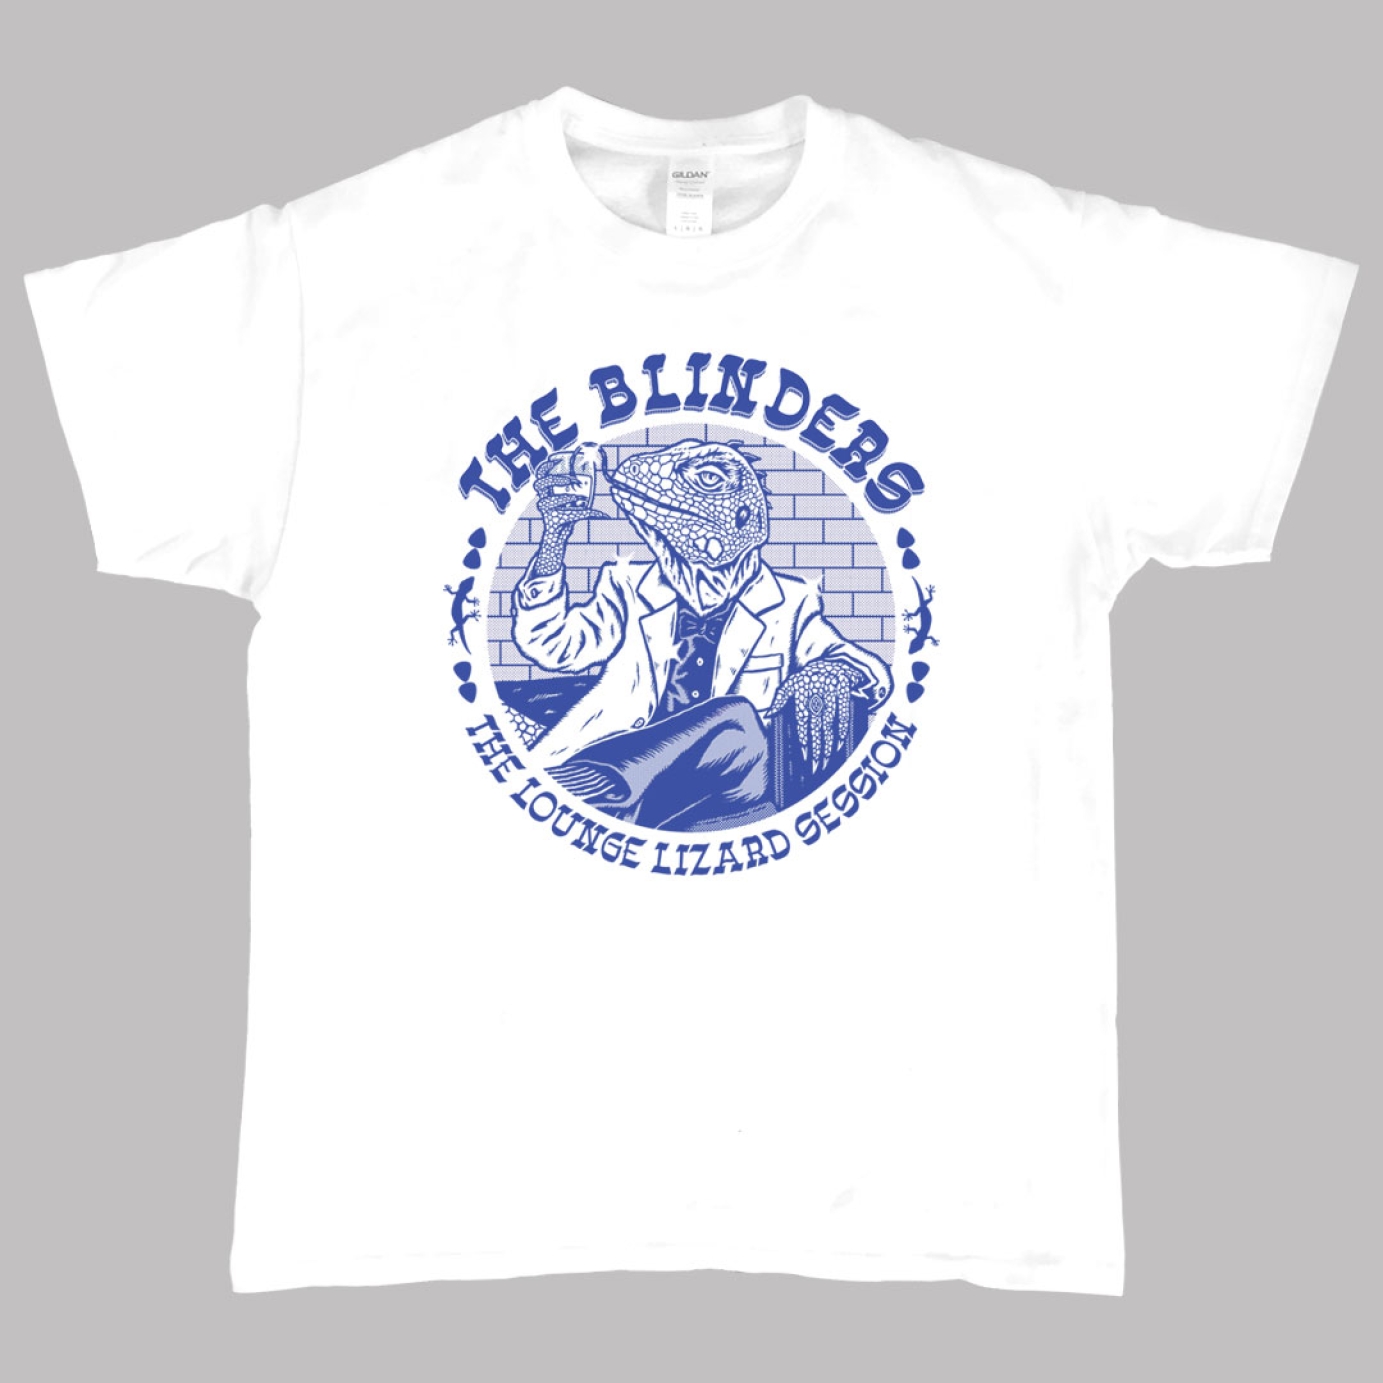 The Lounge Lizard Session t-shirt